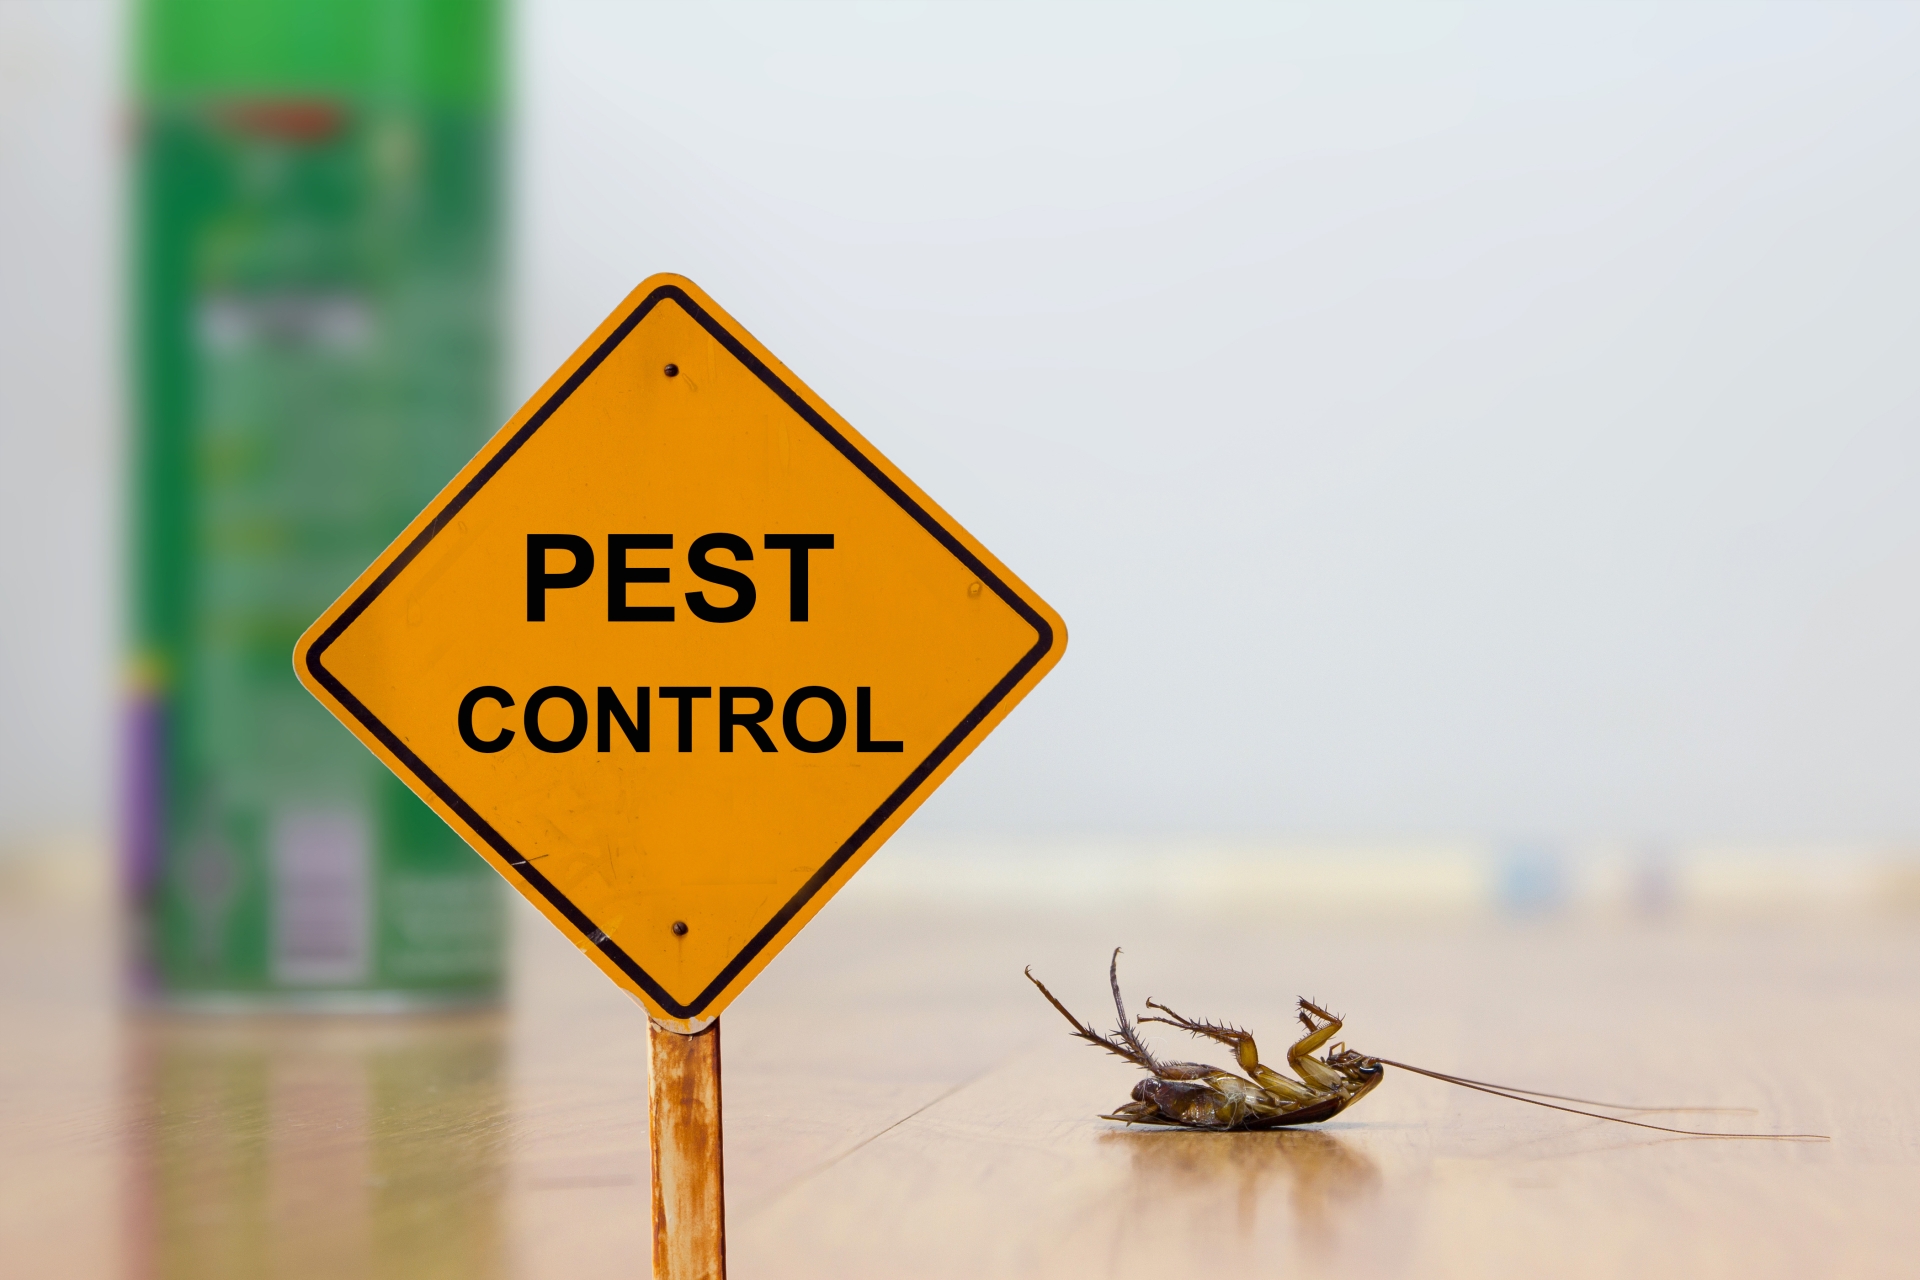 24 Hour Pest Control, Pest Control in Pimlico, SW1. Call Now 020 8166 9746